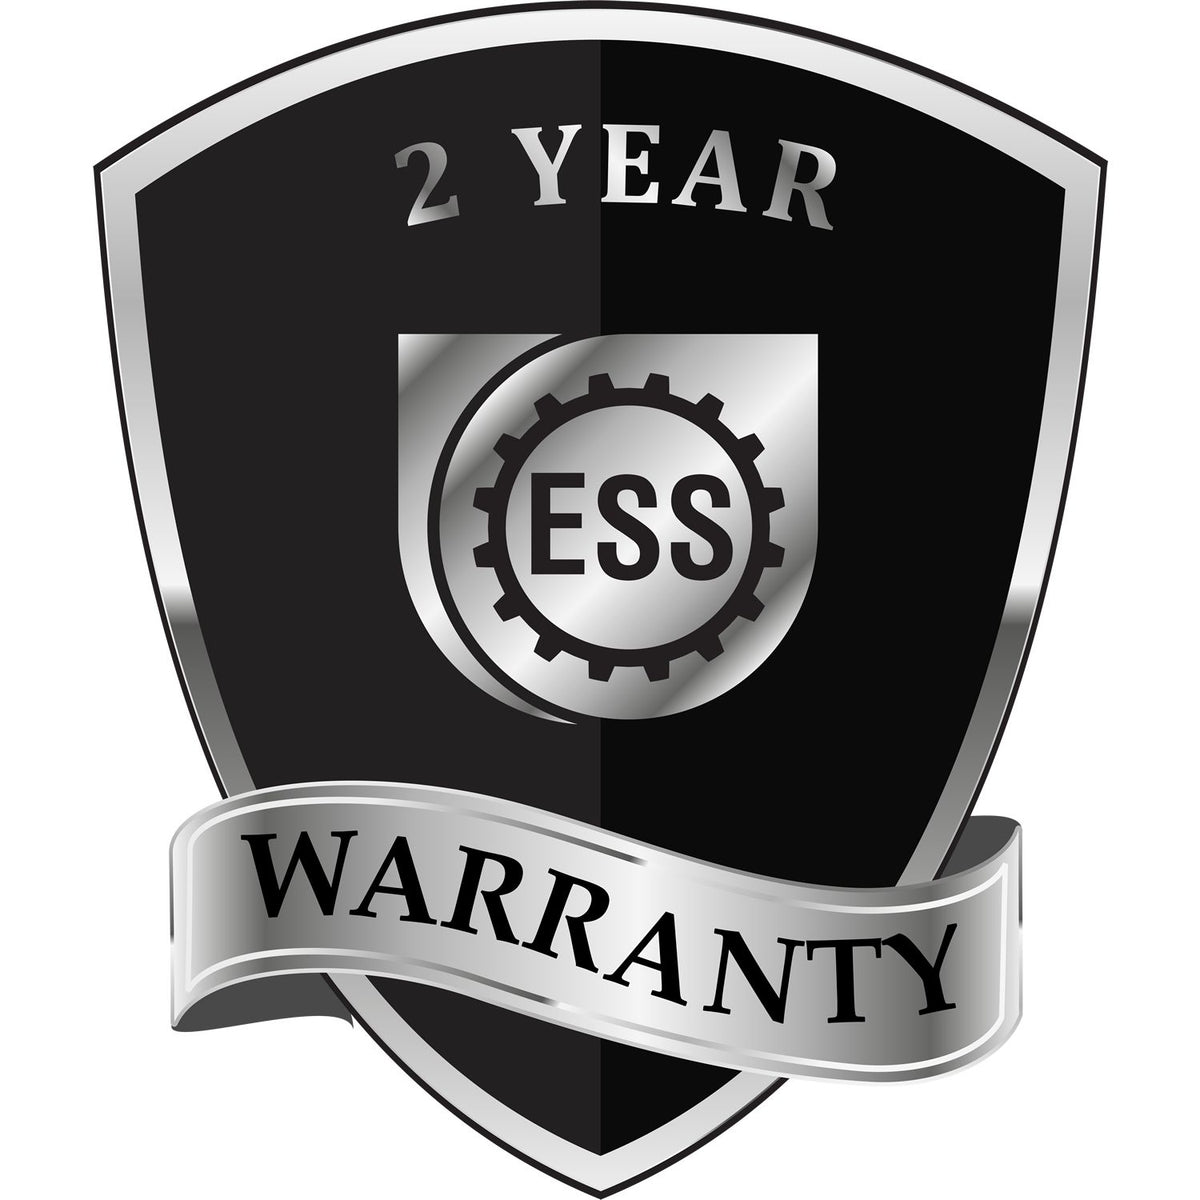 A badge or emblem showing a warranty icon for the Arkansas Engineer Desk Seal